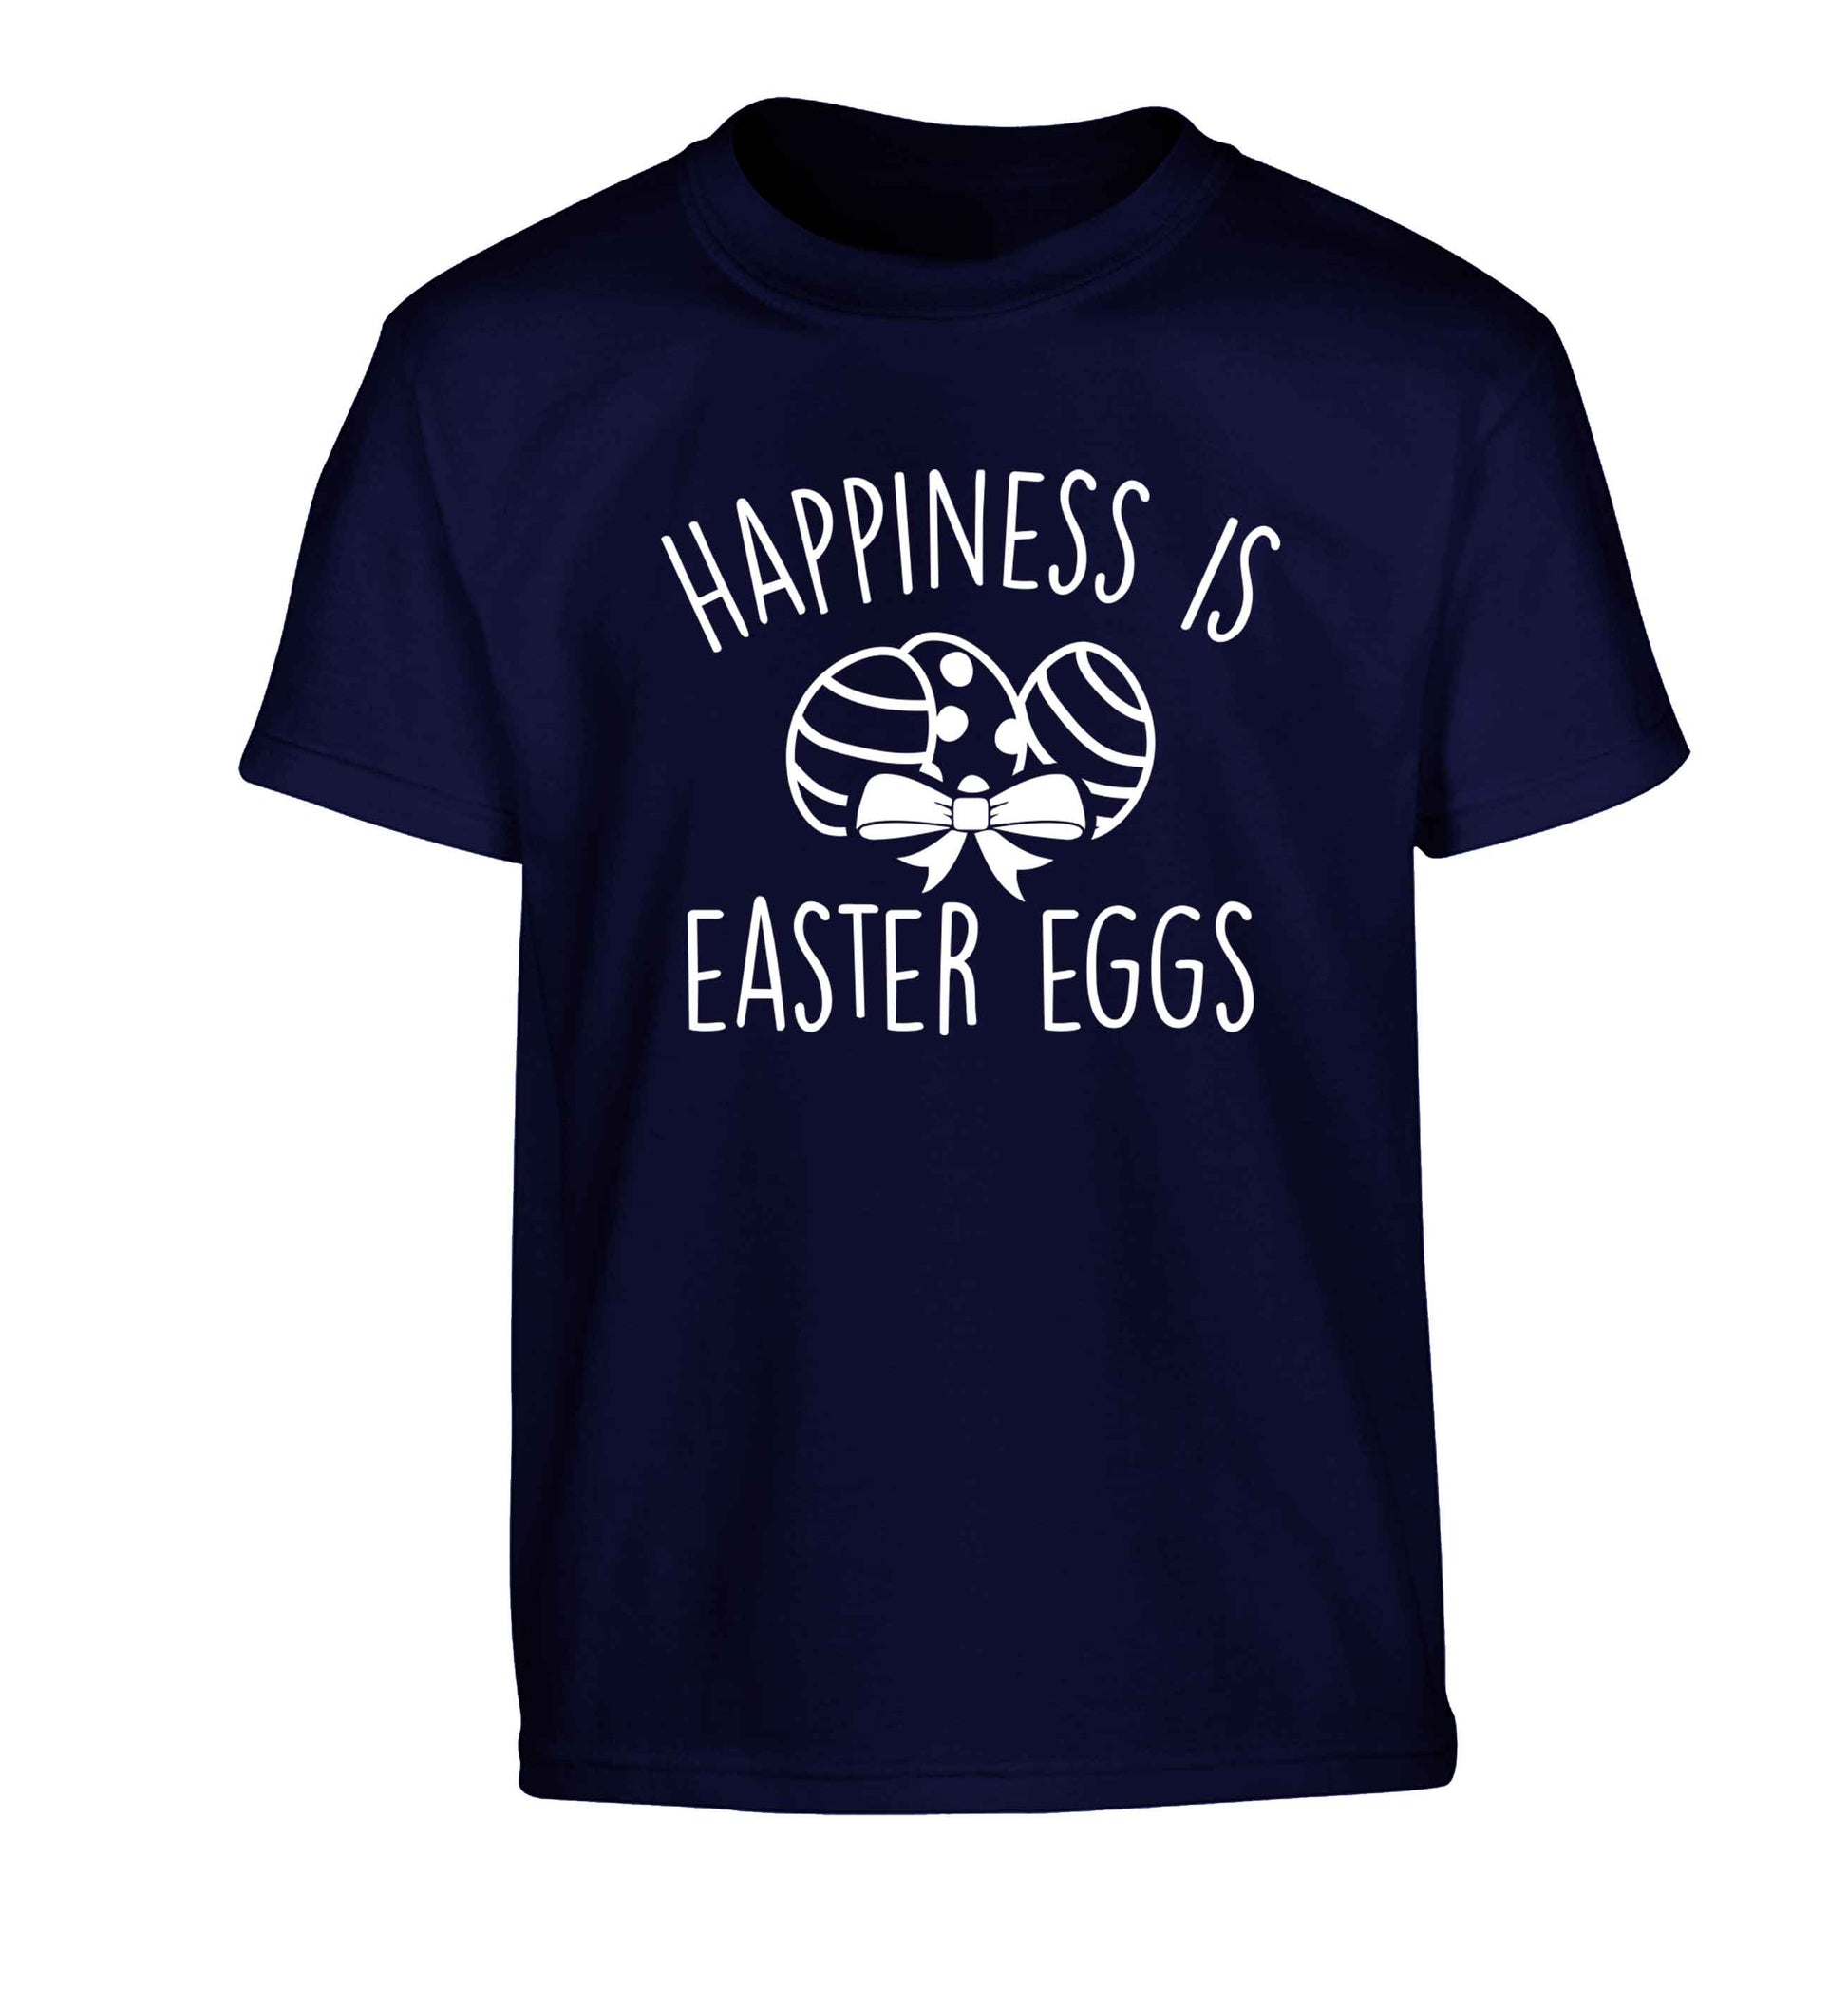 Happiness is Easter eggs Children's navy Tshirt 12-13 Years